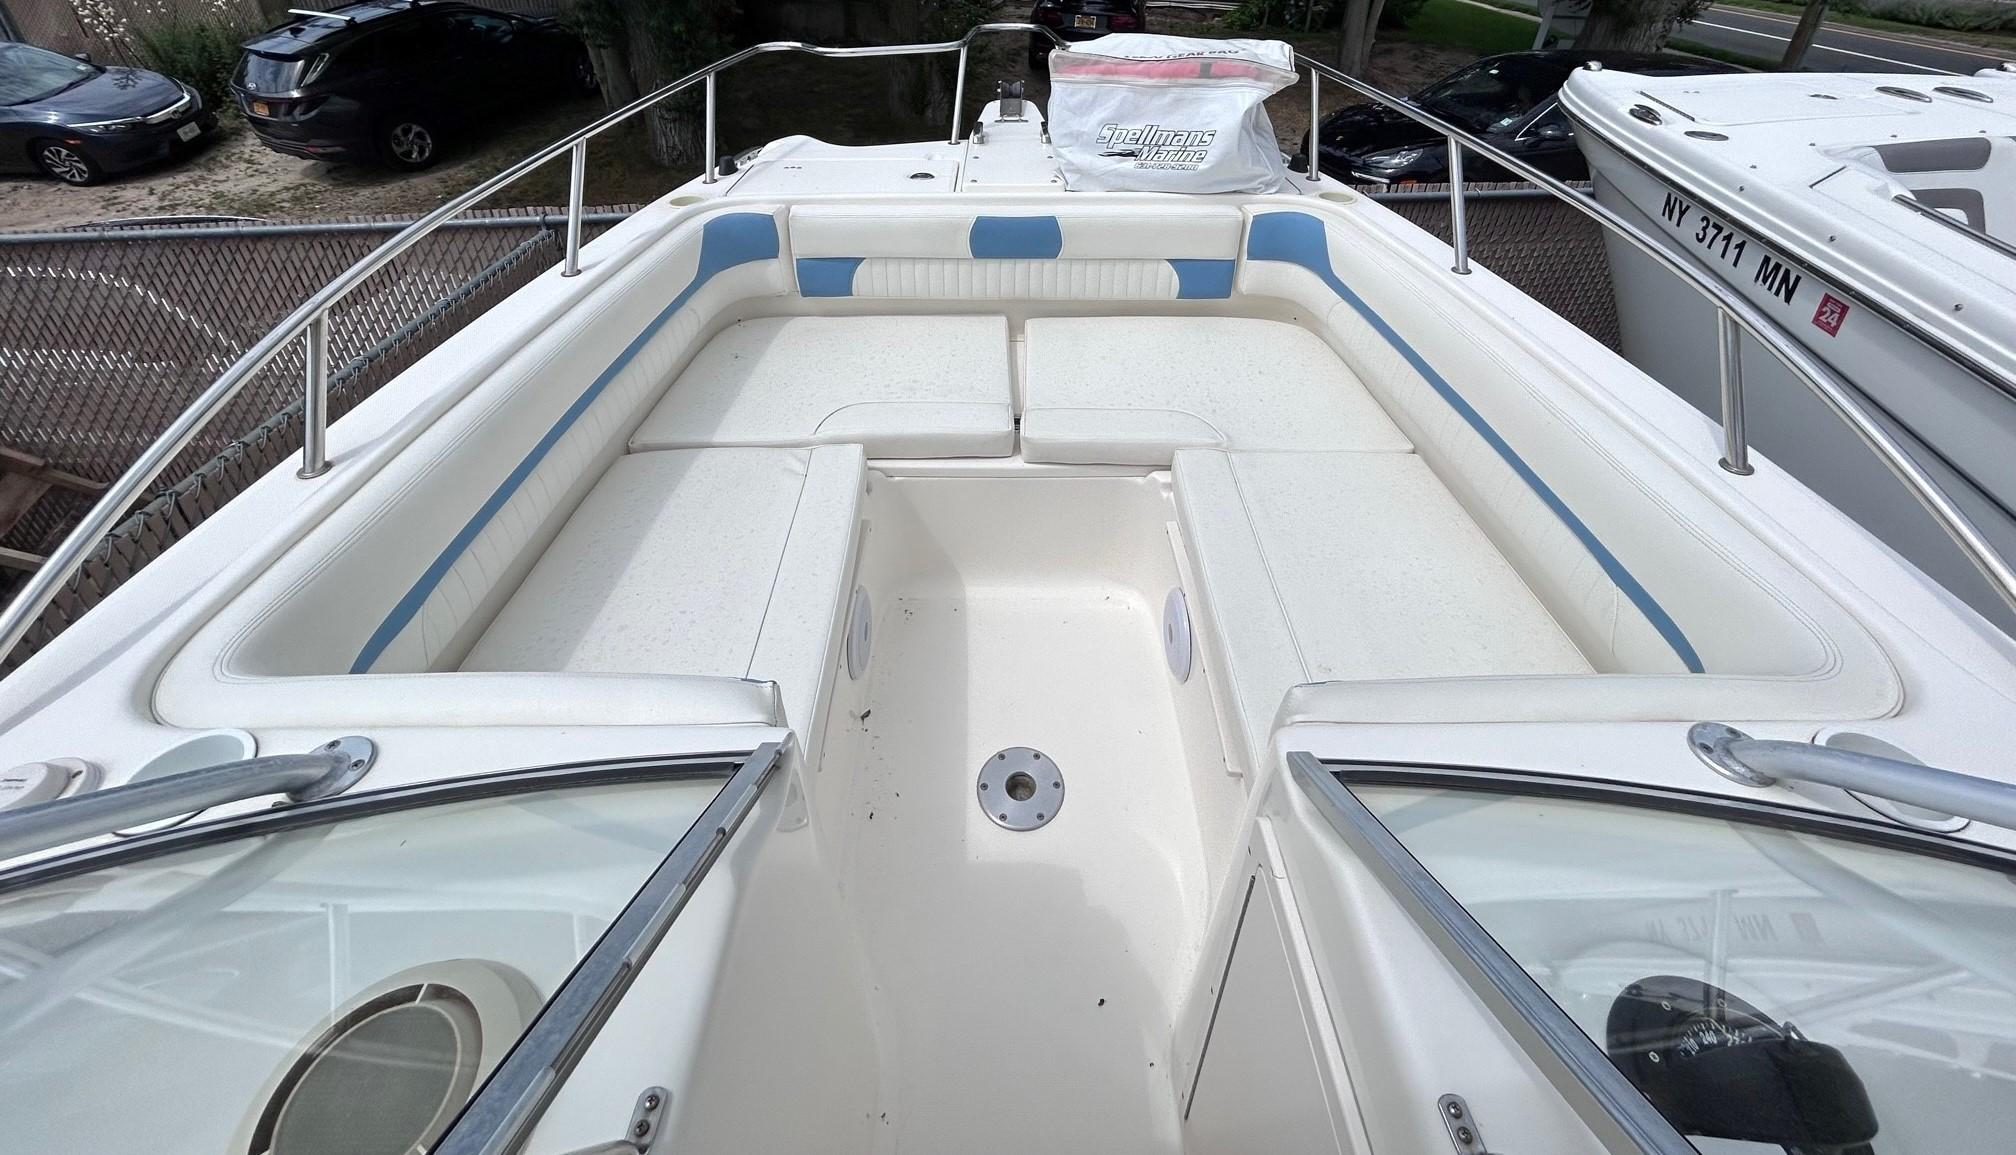 2007 World Cat 250 DC Saltwater Fishing for sale - YachtWorld